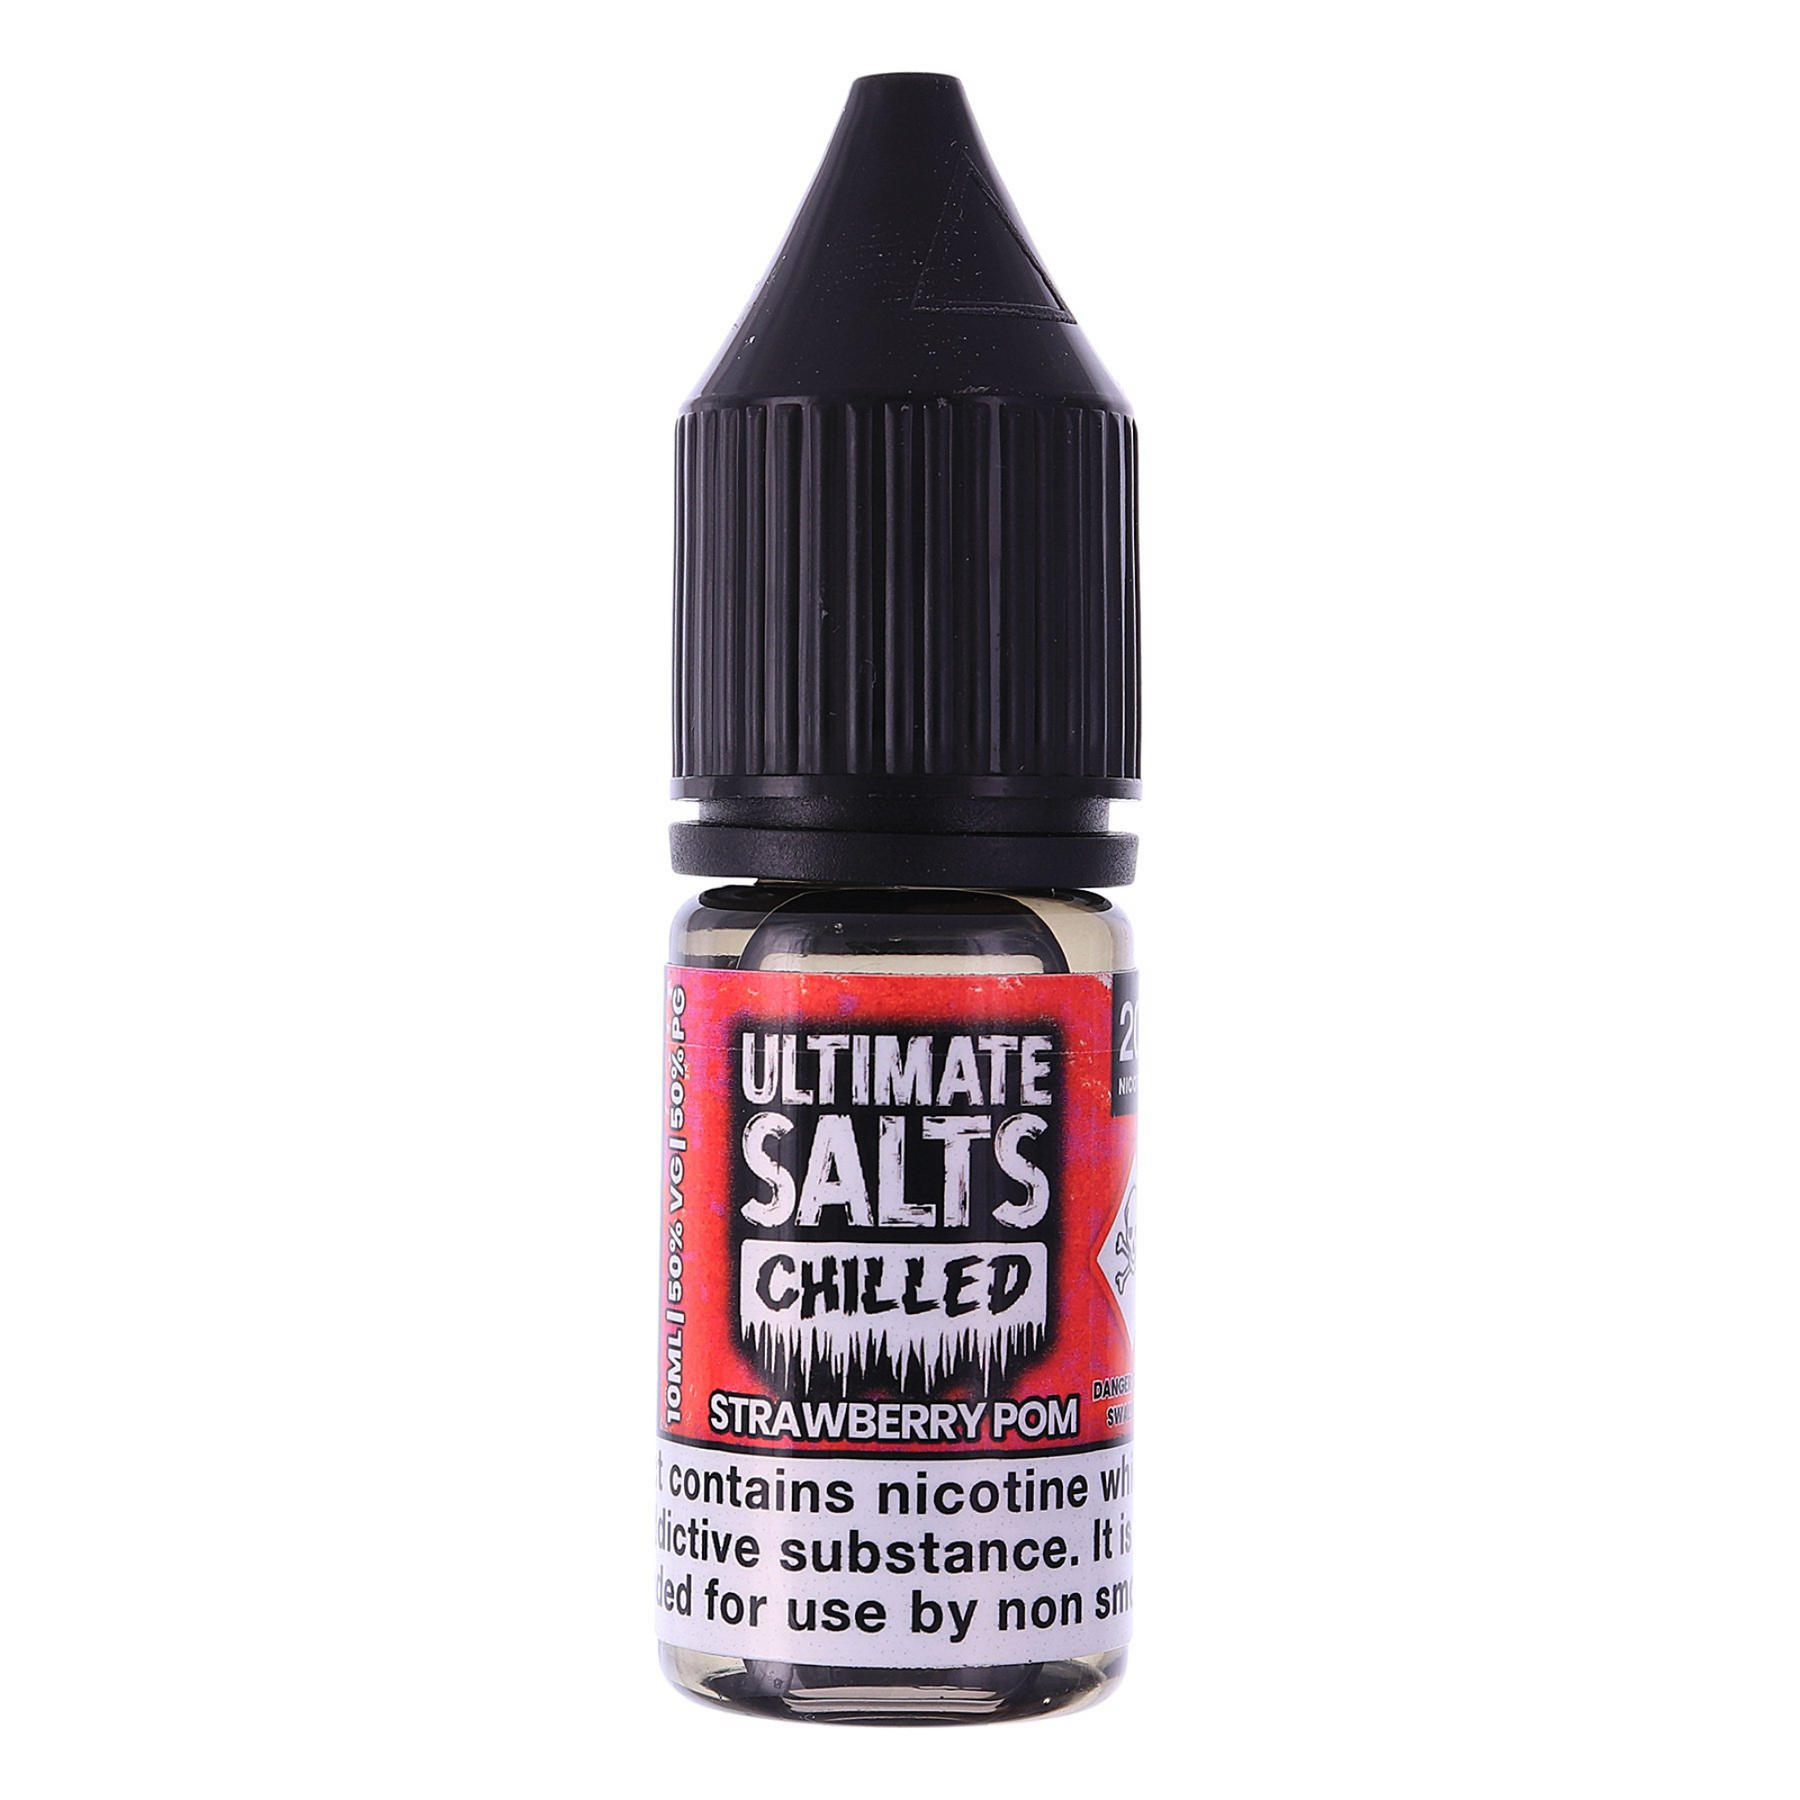 Ultimate Salts E-Liquid - Strawberry Pom Chilled 10mg